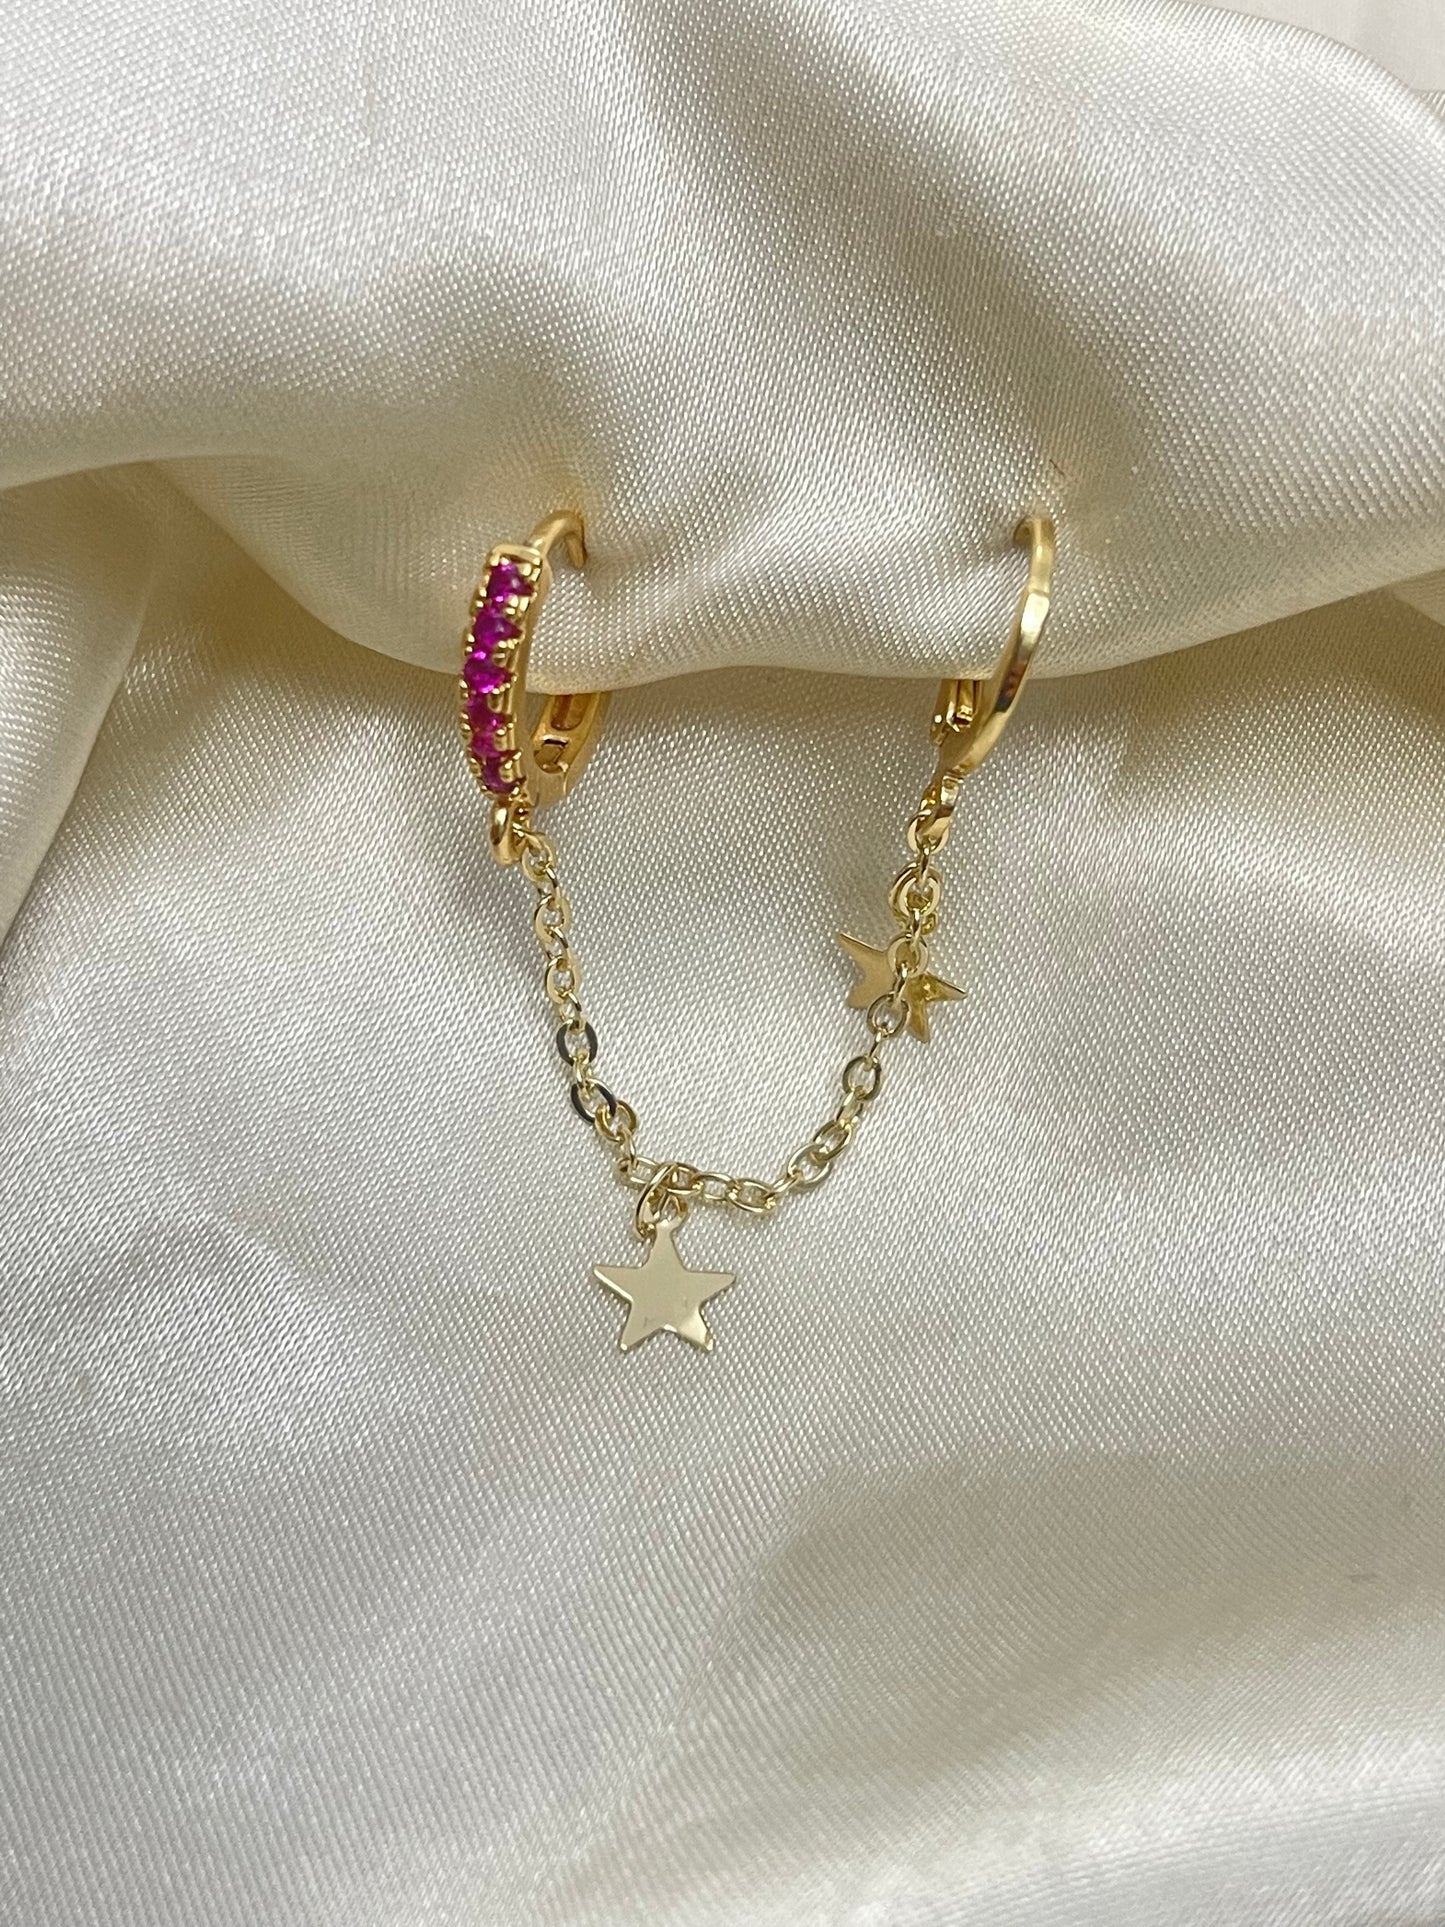 Connected Crystal Dangles Gold Plated Earrings